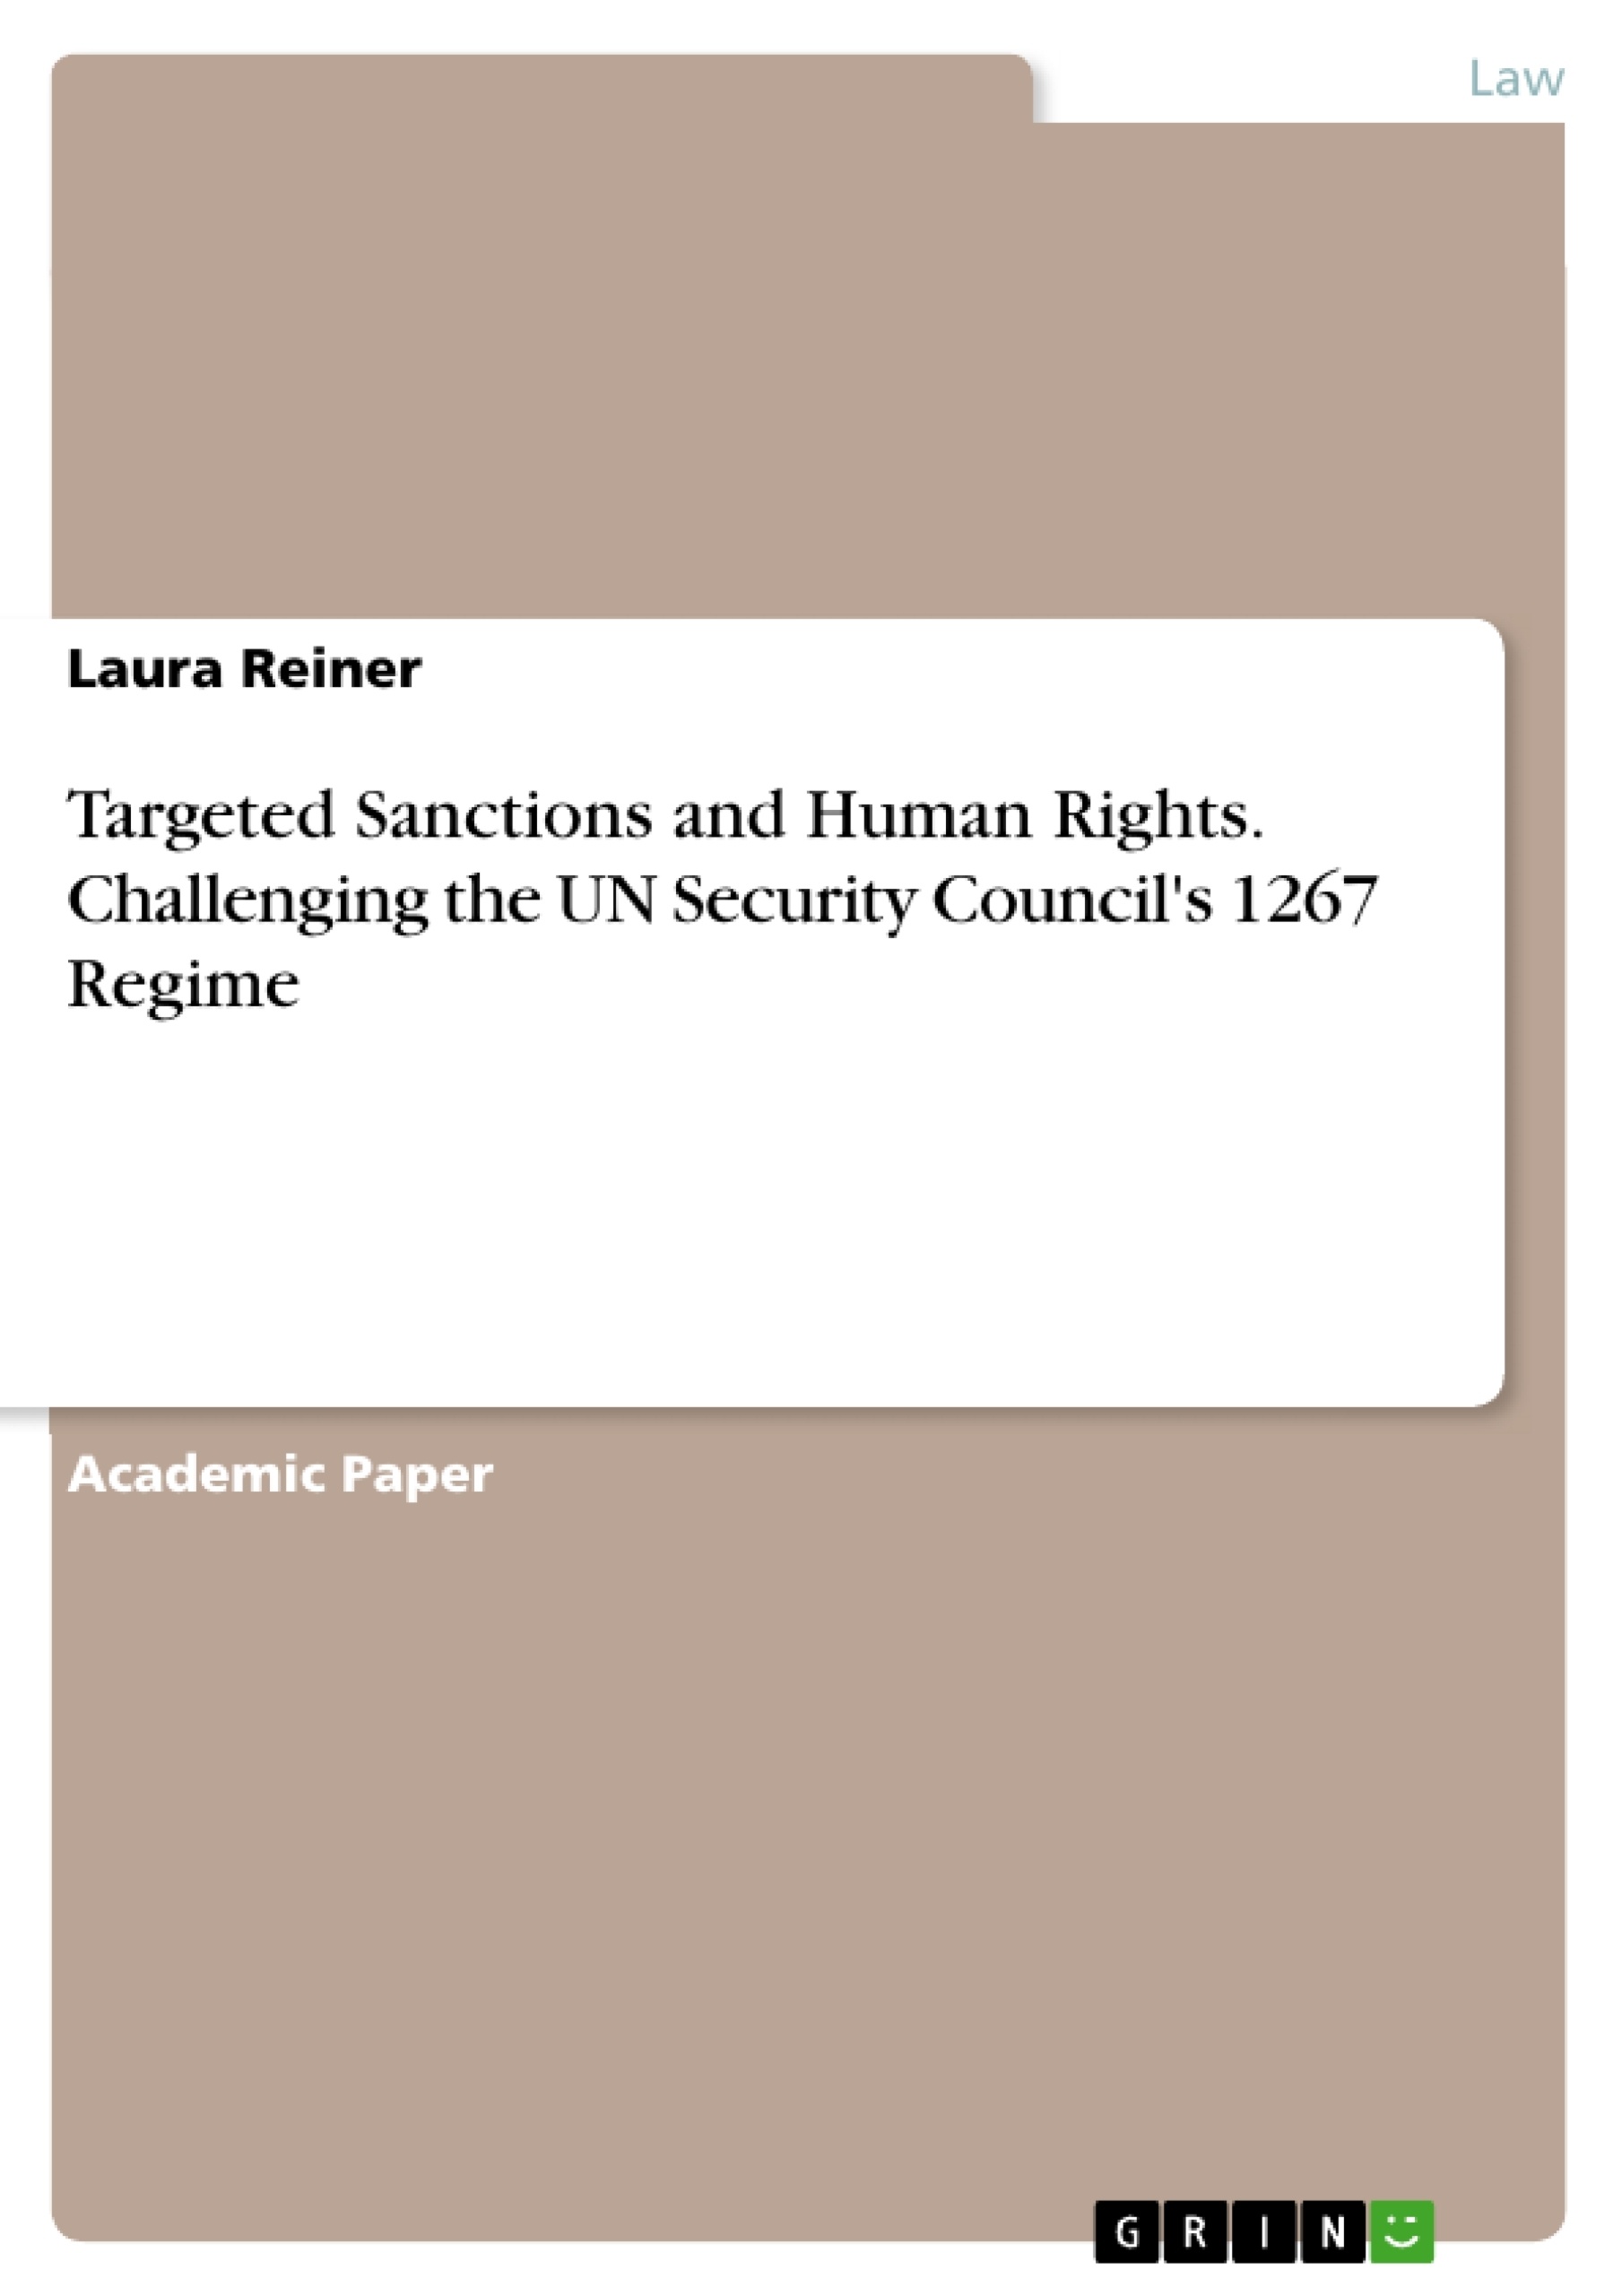 Title: Targeted Sanctions and Human Rights. Challenging the UN Security Council's 1267 Regime